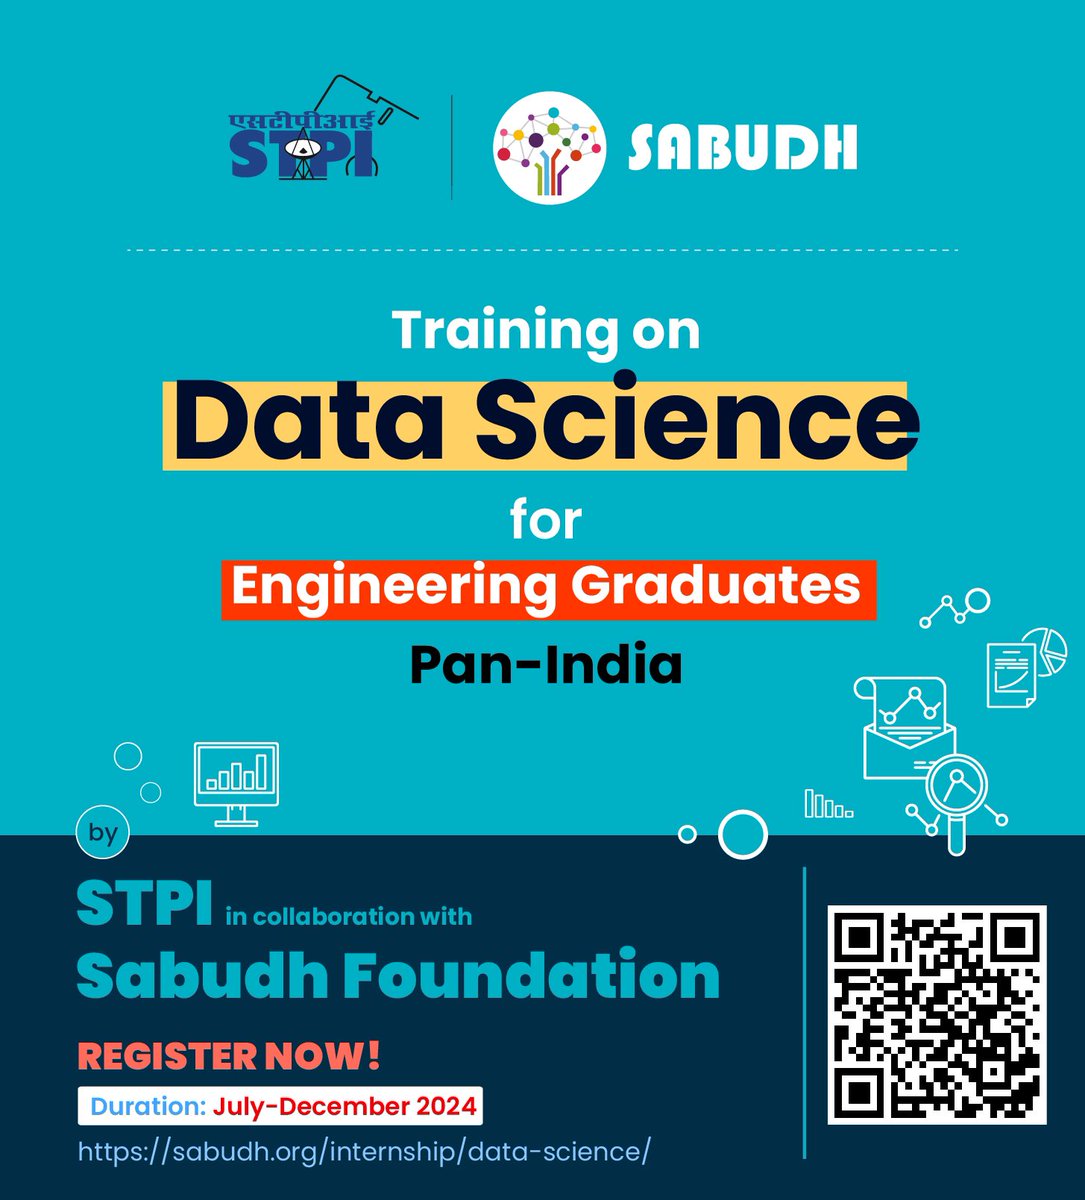 In Collaboration with Sabudh Foundation, #STPIINDIA invites Pan-India Engineering Graduates to Register for the Training on Data Science. Course Duration - July - December 2024 Enroll Now - sabudh.org/internship/dat… @arvindtw @SabudhF